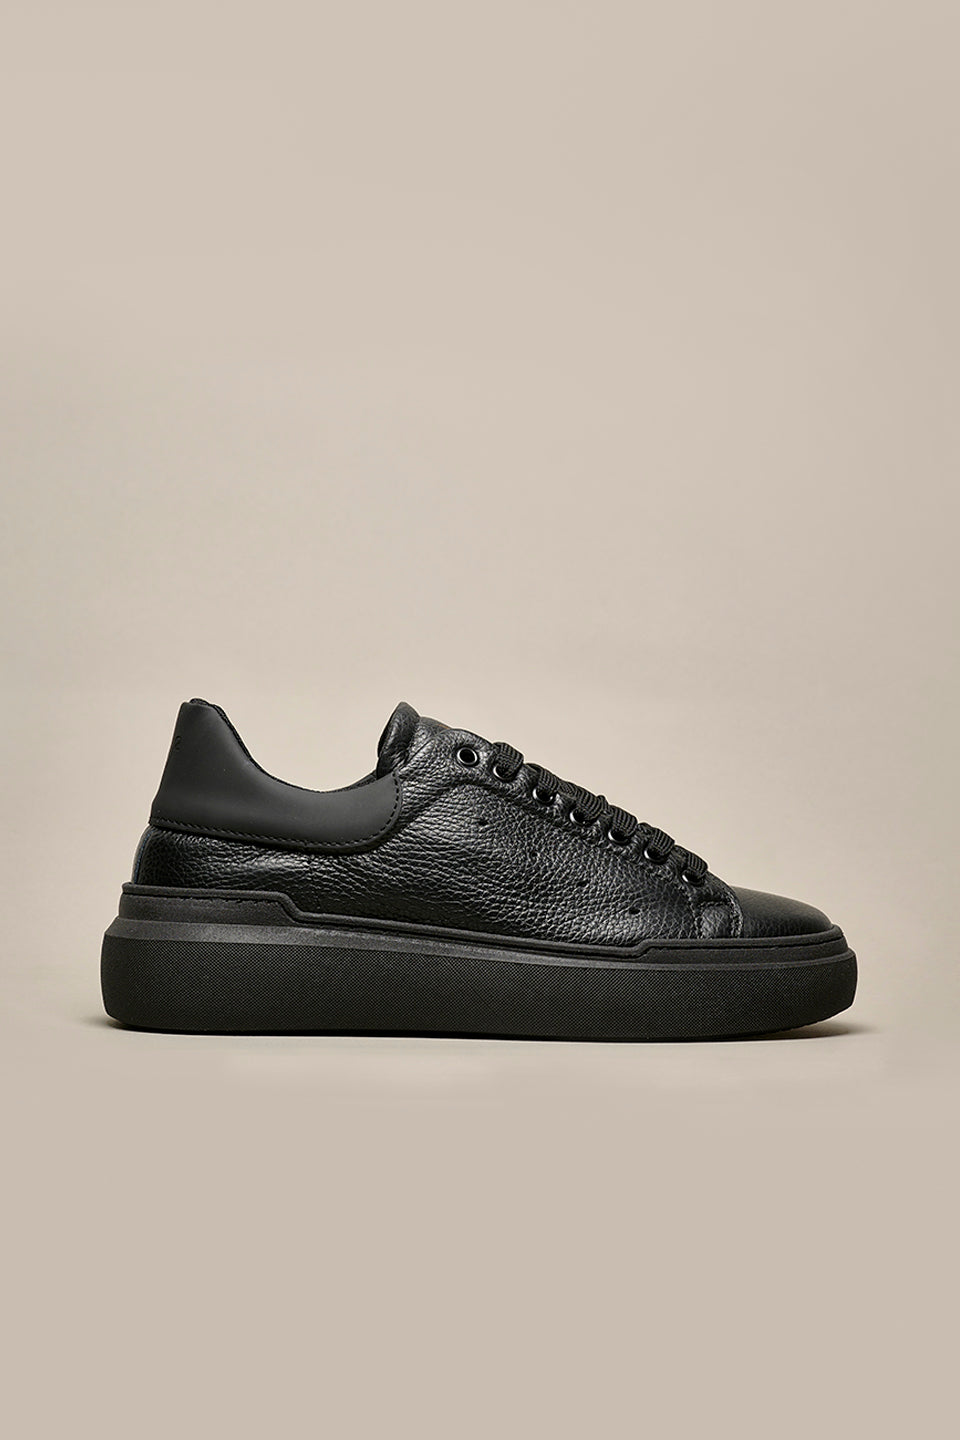 HAMMER - Black textured leather high-sole sneakers